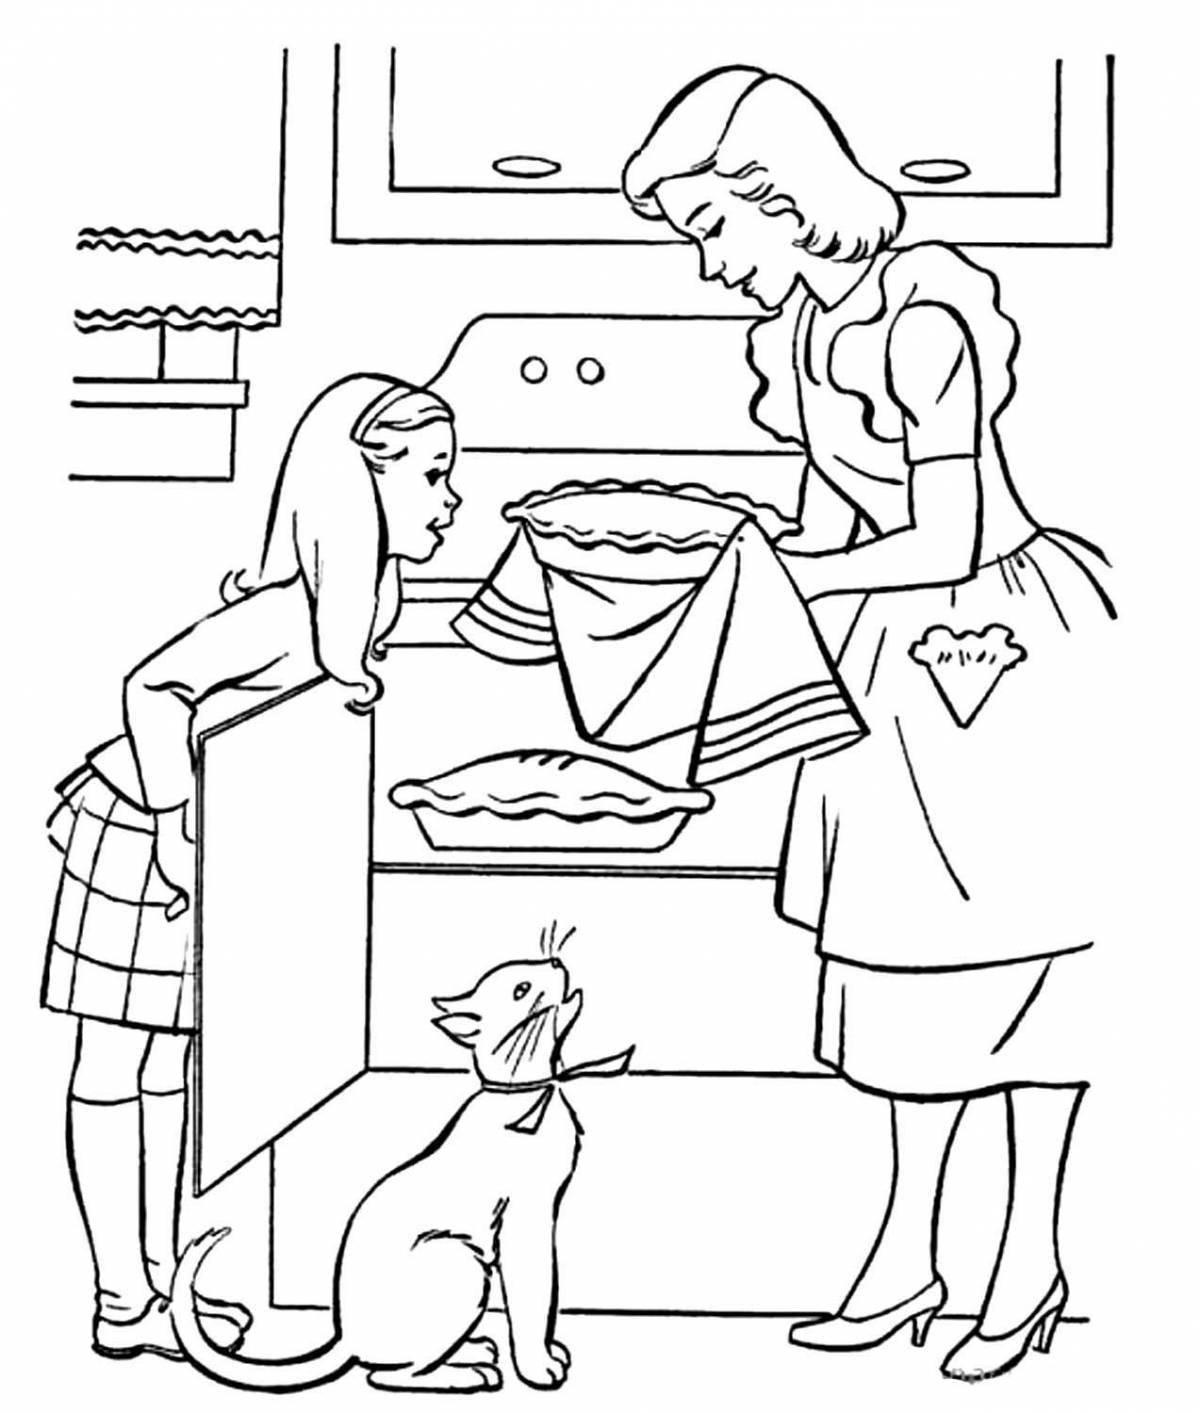 Great mom coloring book for kids